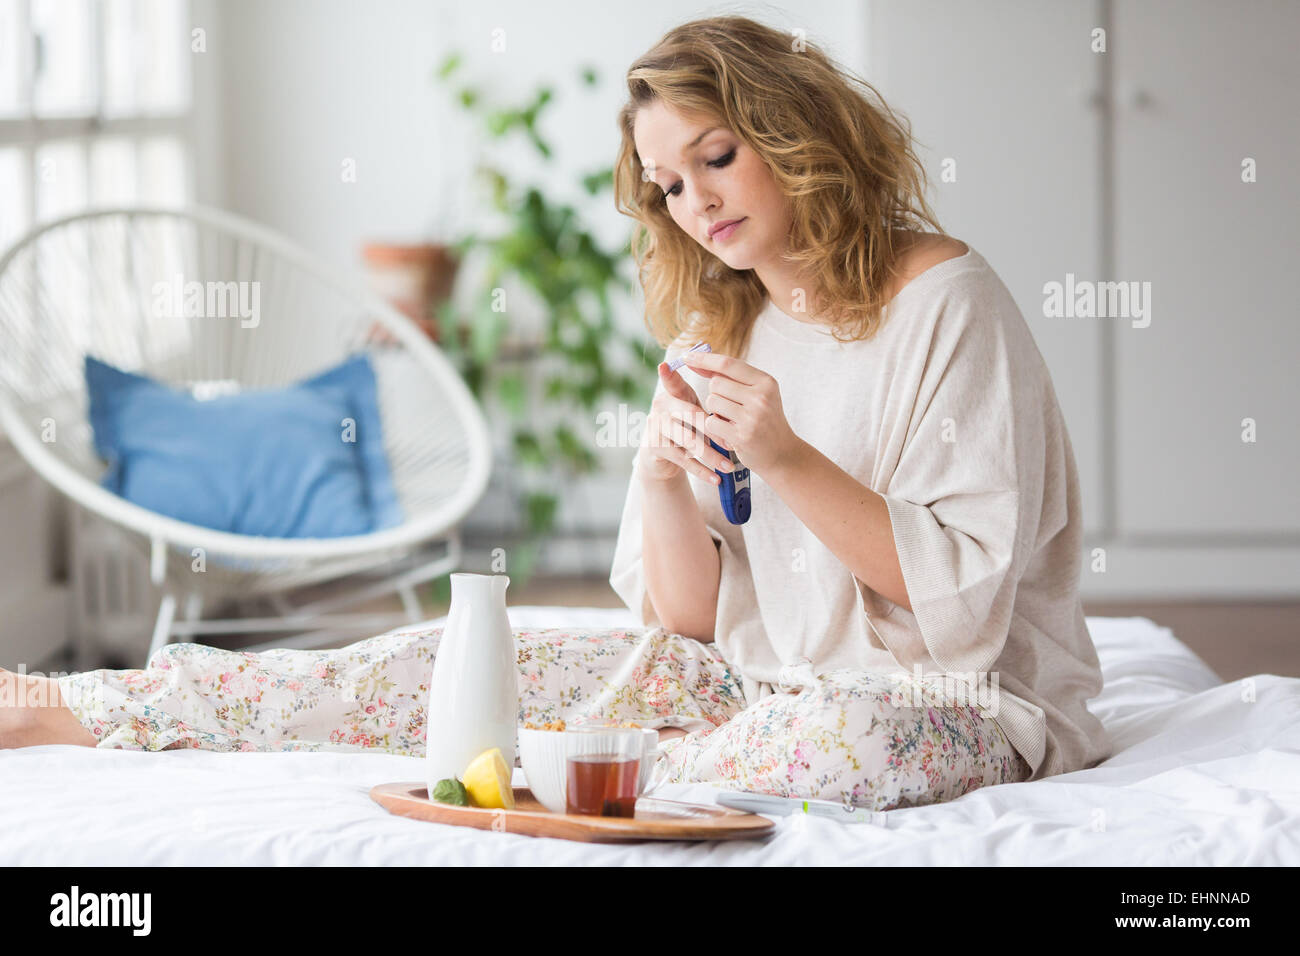 A diabetic person is checking her blood sugar level (self glycemia)with glucometer before breakfast. Stock Photo